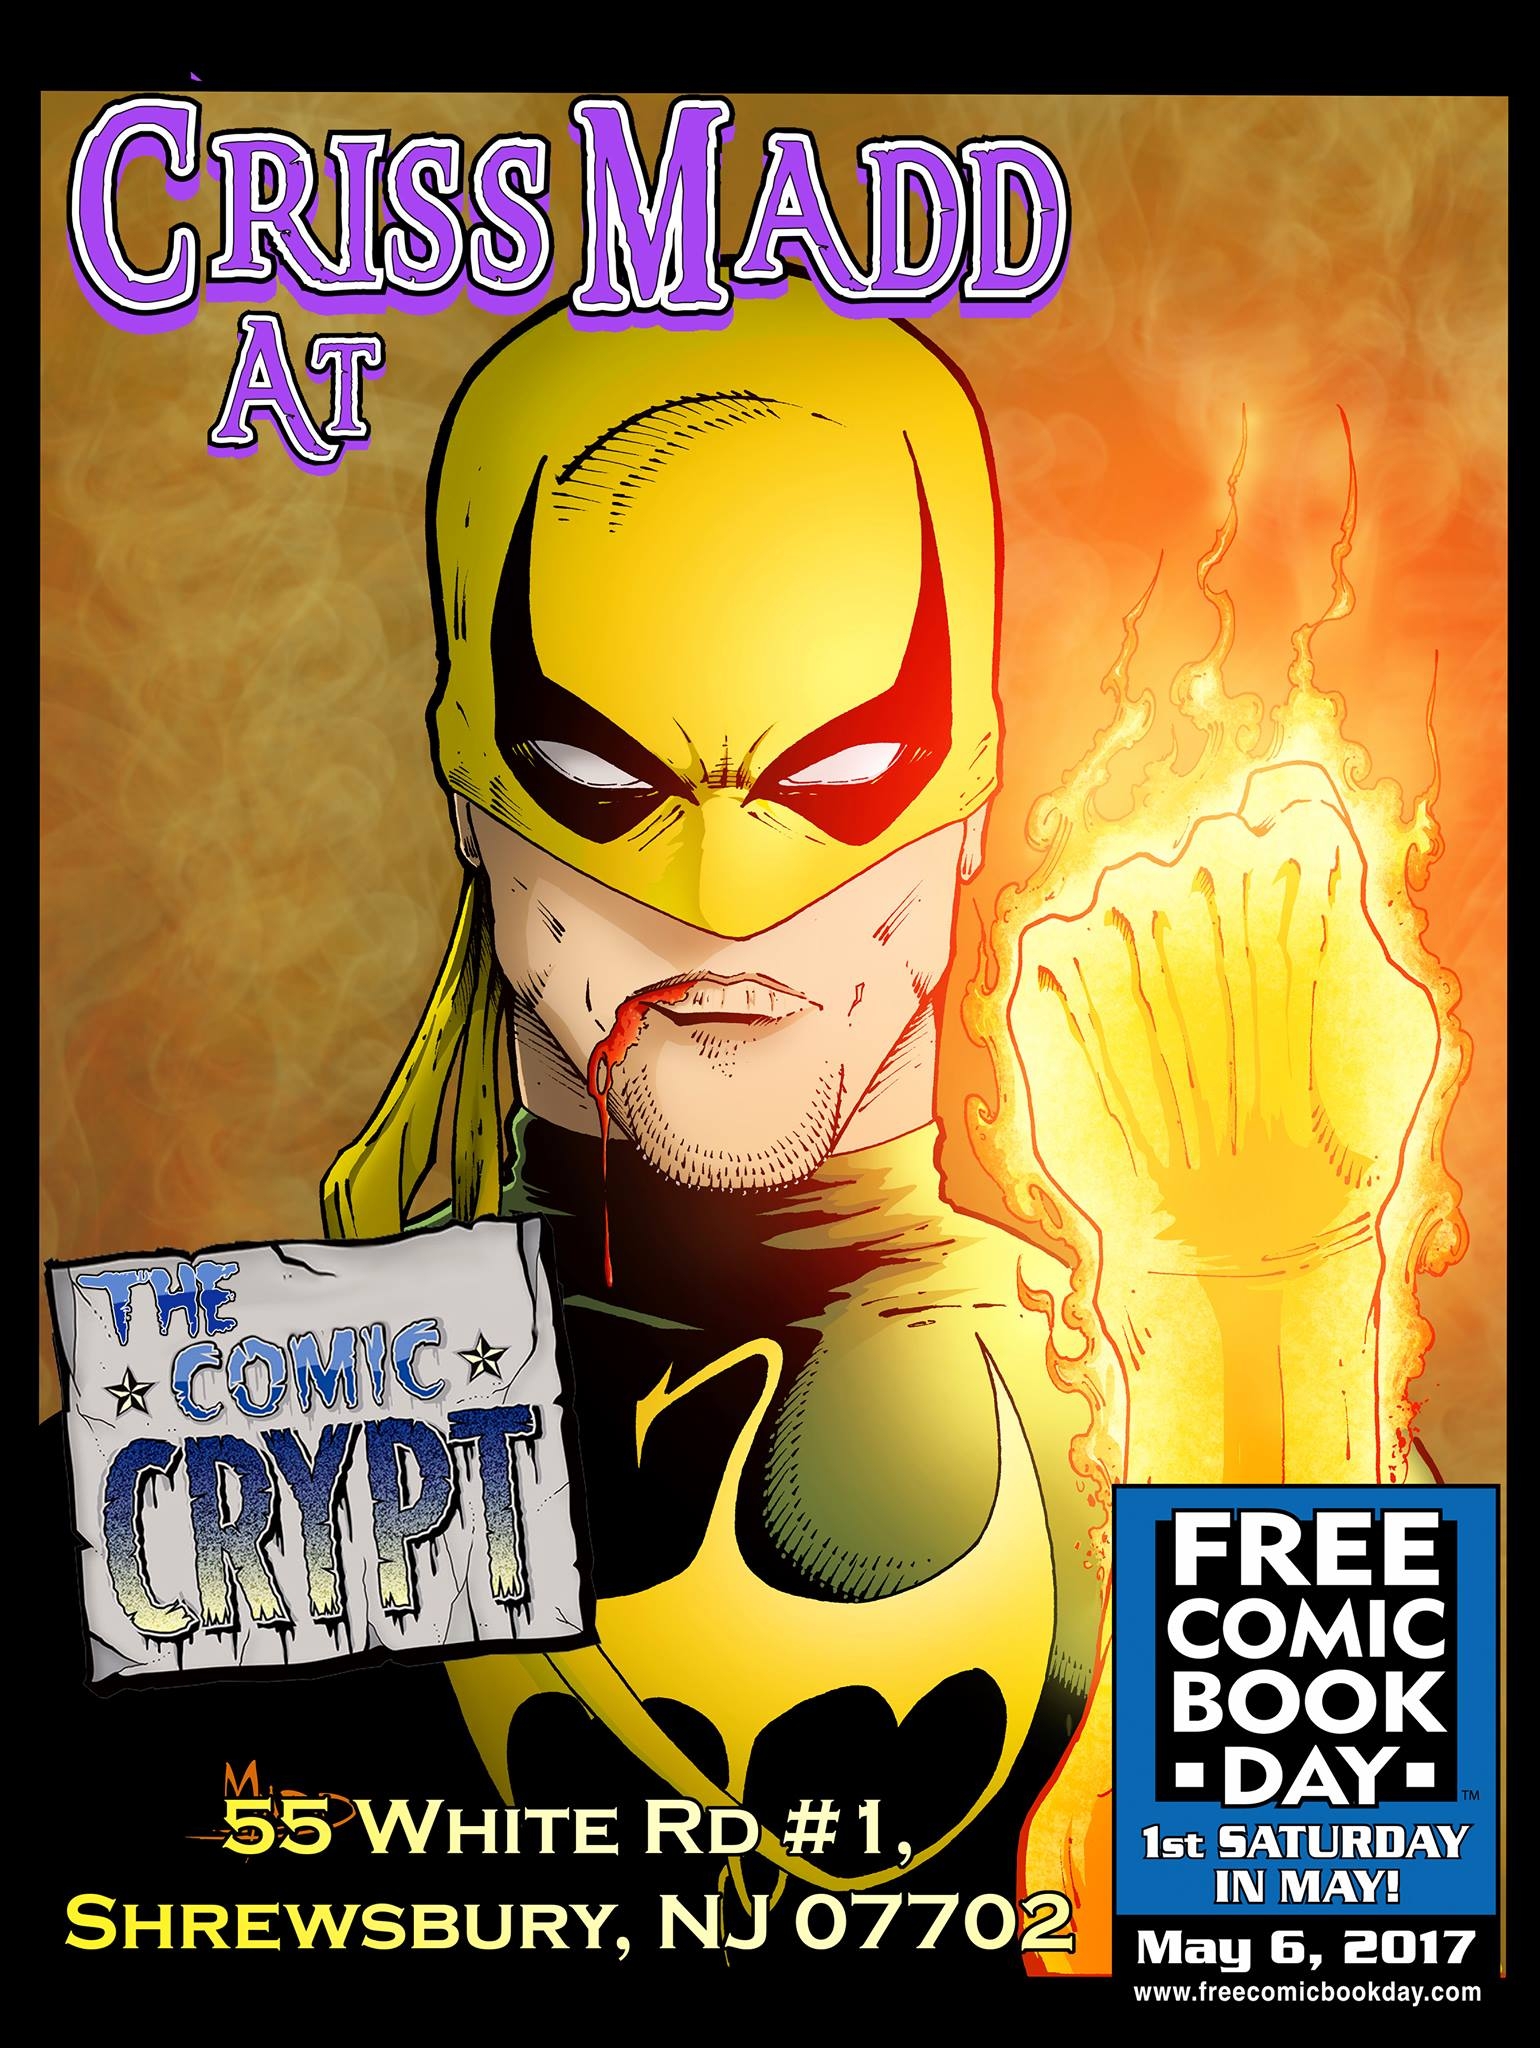 MADDNESS will Consume Shrewsbury, NJ @ The Comic Crypt for Free Comic Book Day as Criss Madd makes an appearnace